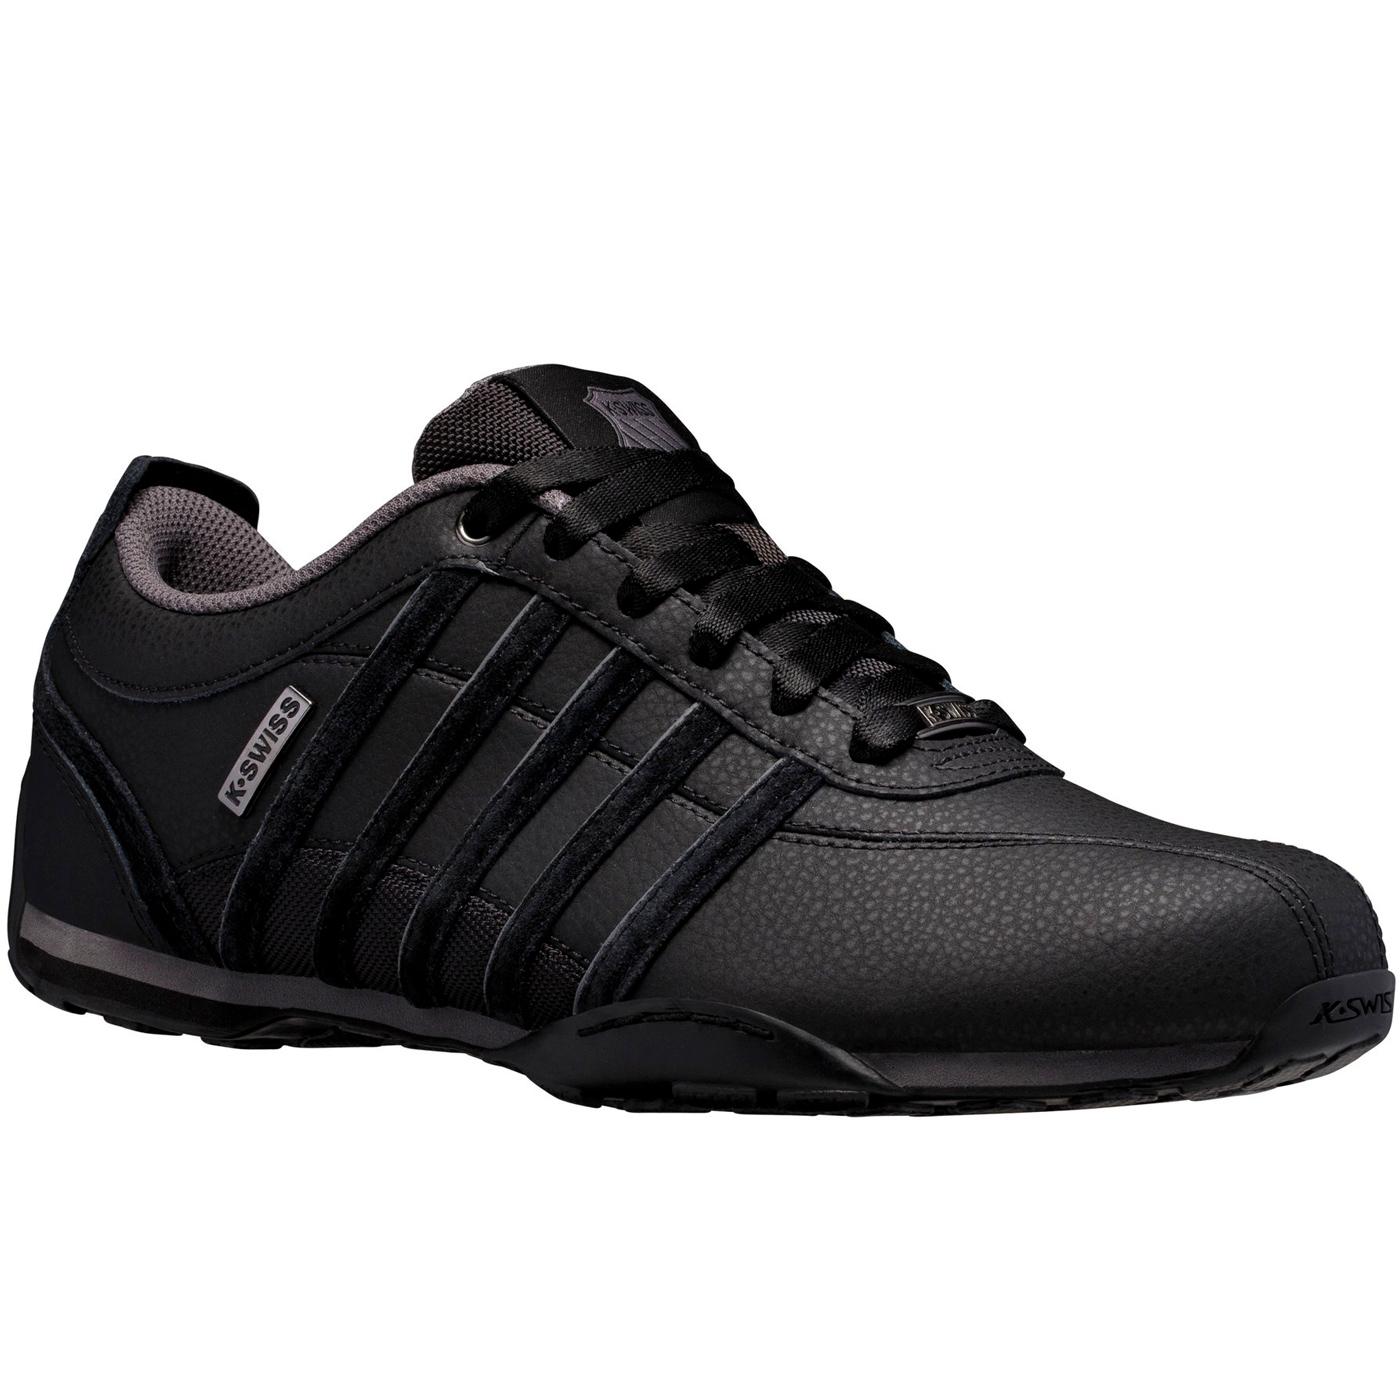 MENS NEW KSWISS ARVEE TRAINERS BLACK CHARCOAL ACE UP LEATHER SNEAKERS SIZE 6-12 